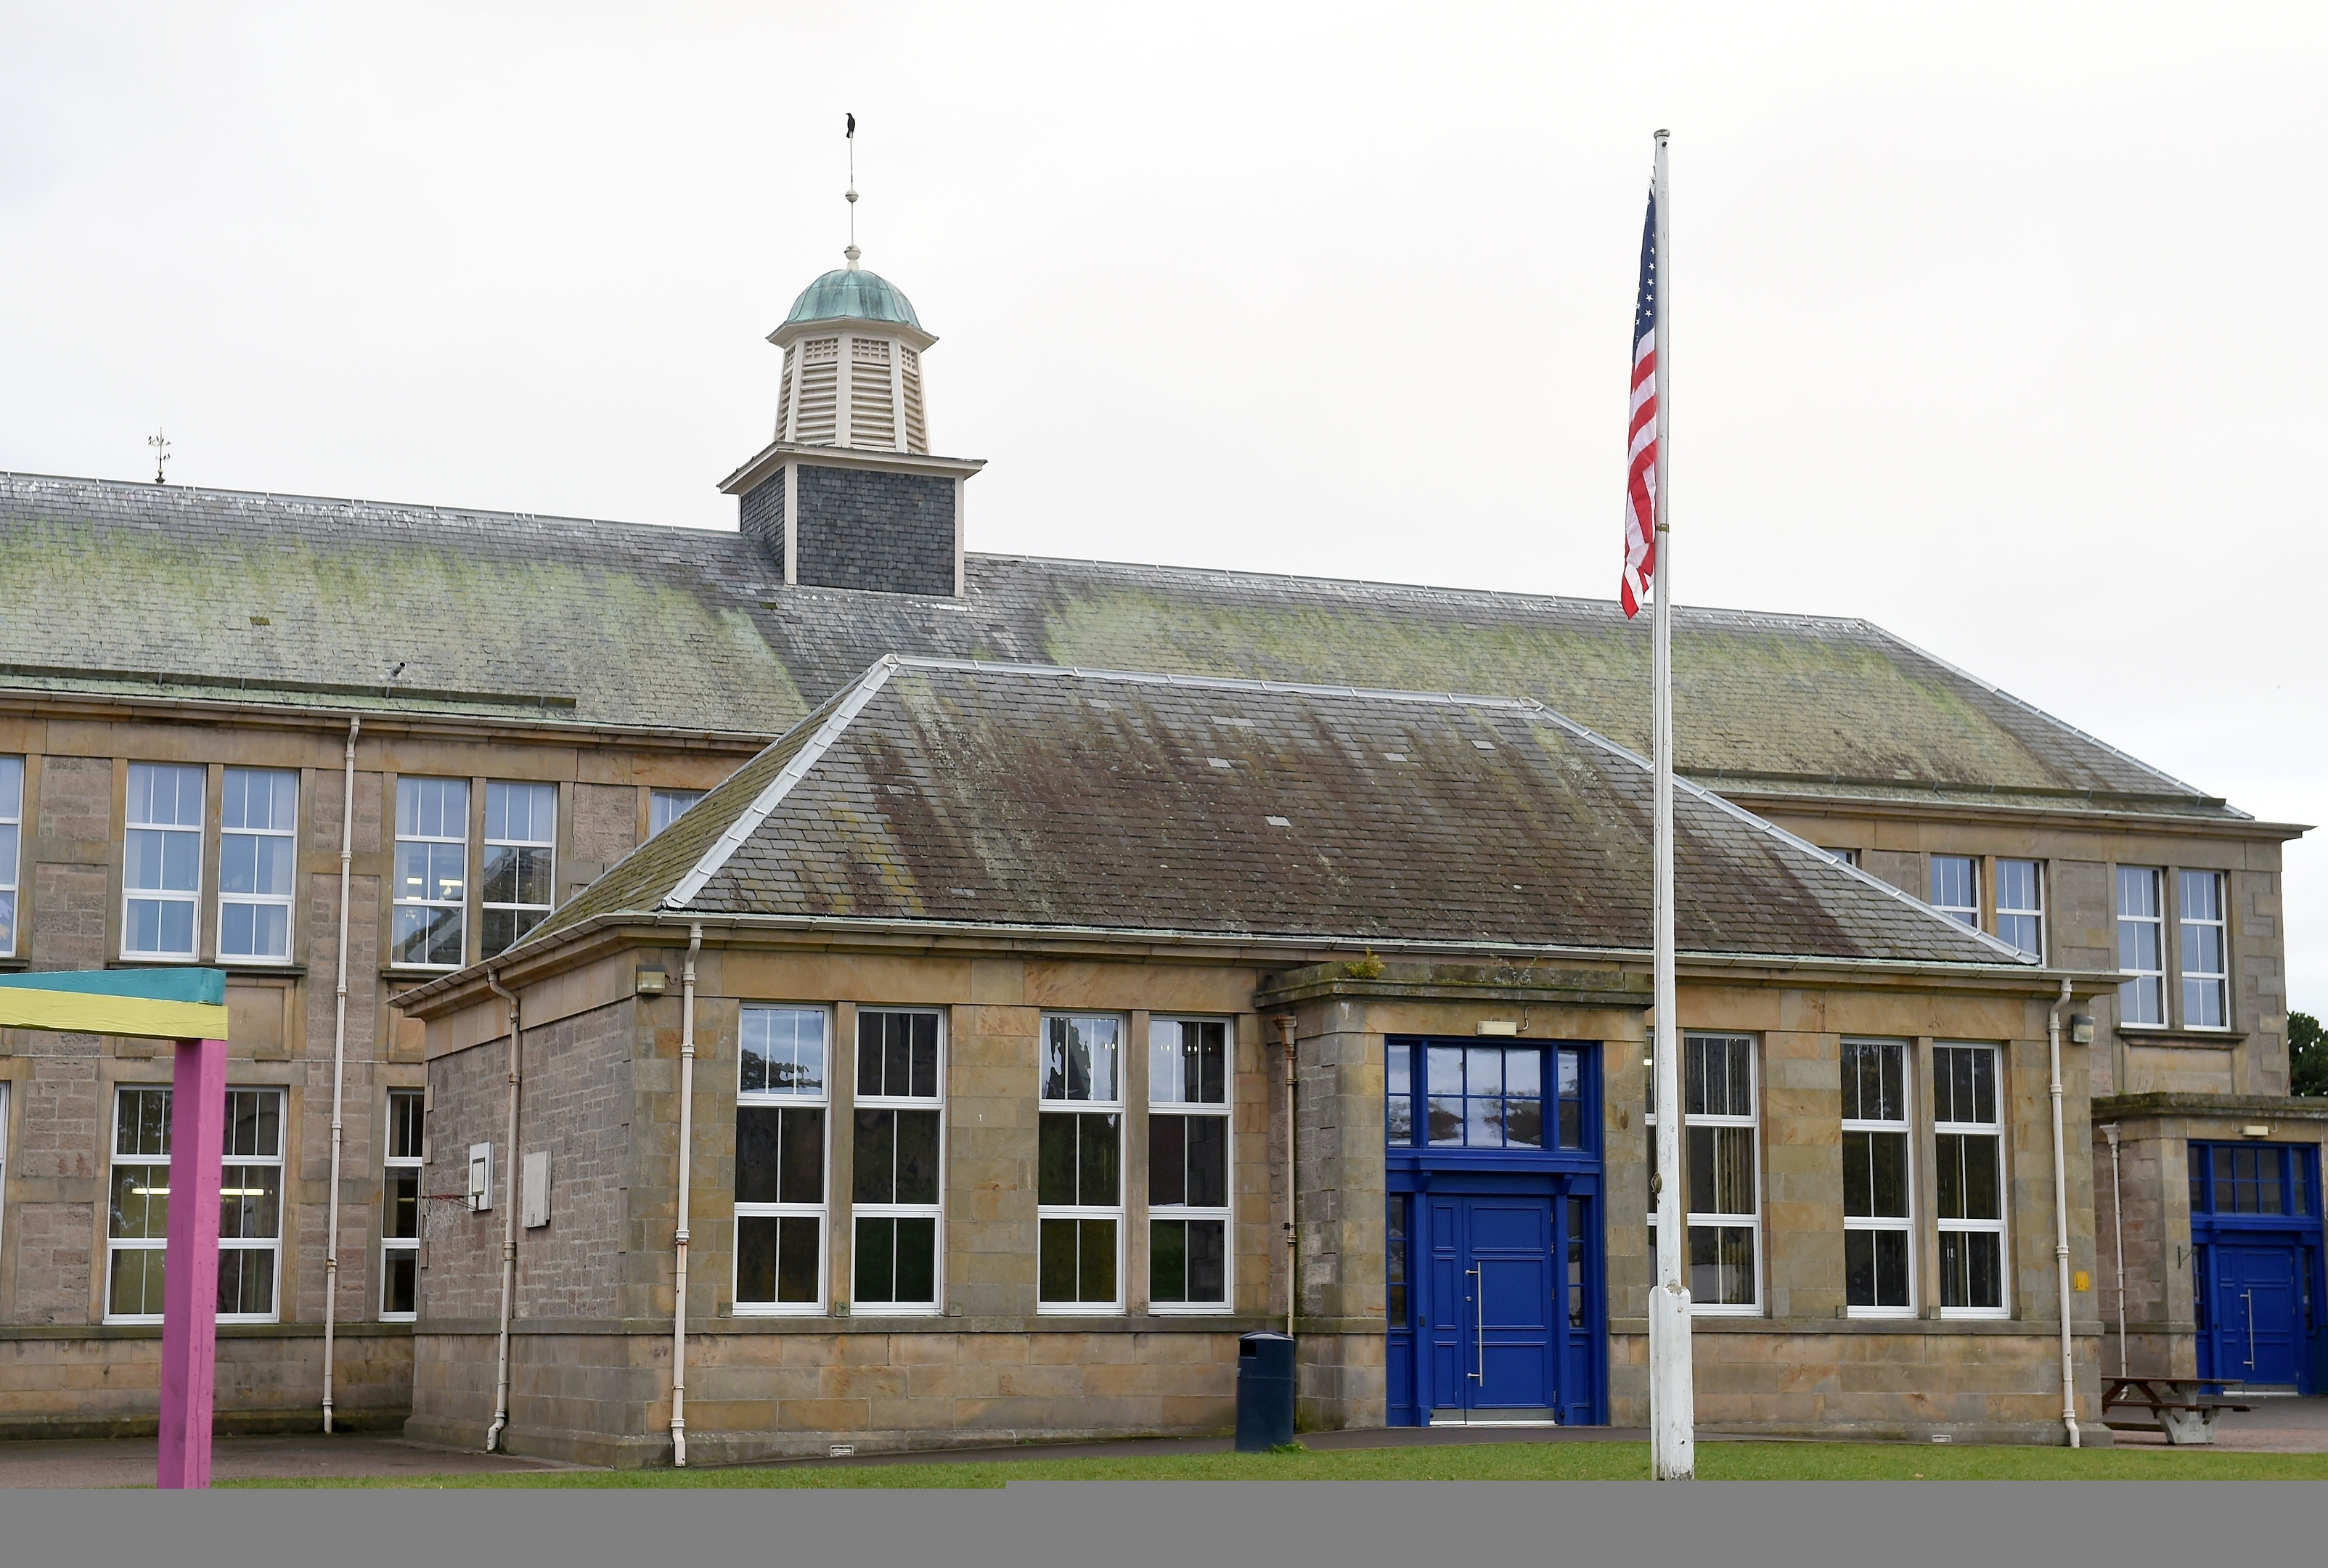 The Stars and Stripes flag of America flies in the grounds of Rosebank Primary School, Nairn.